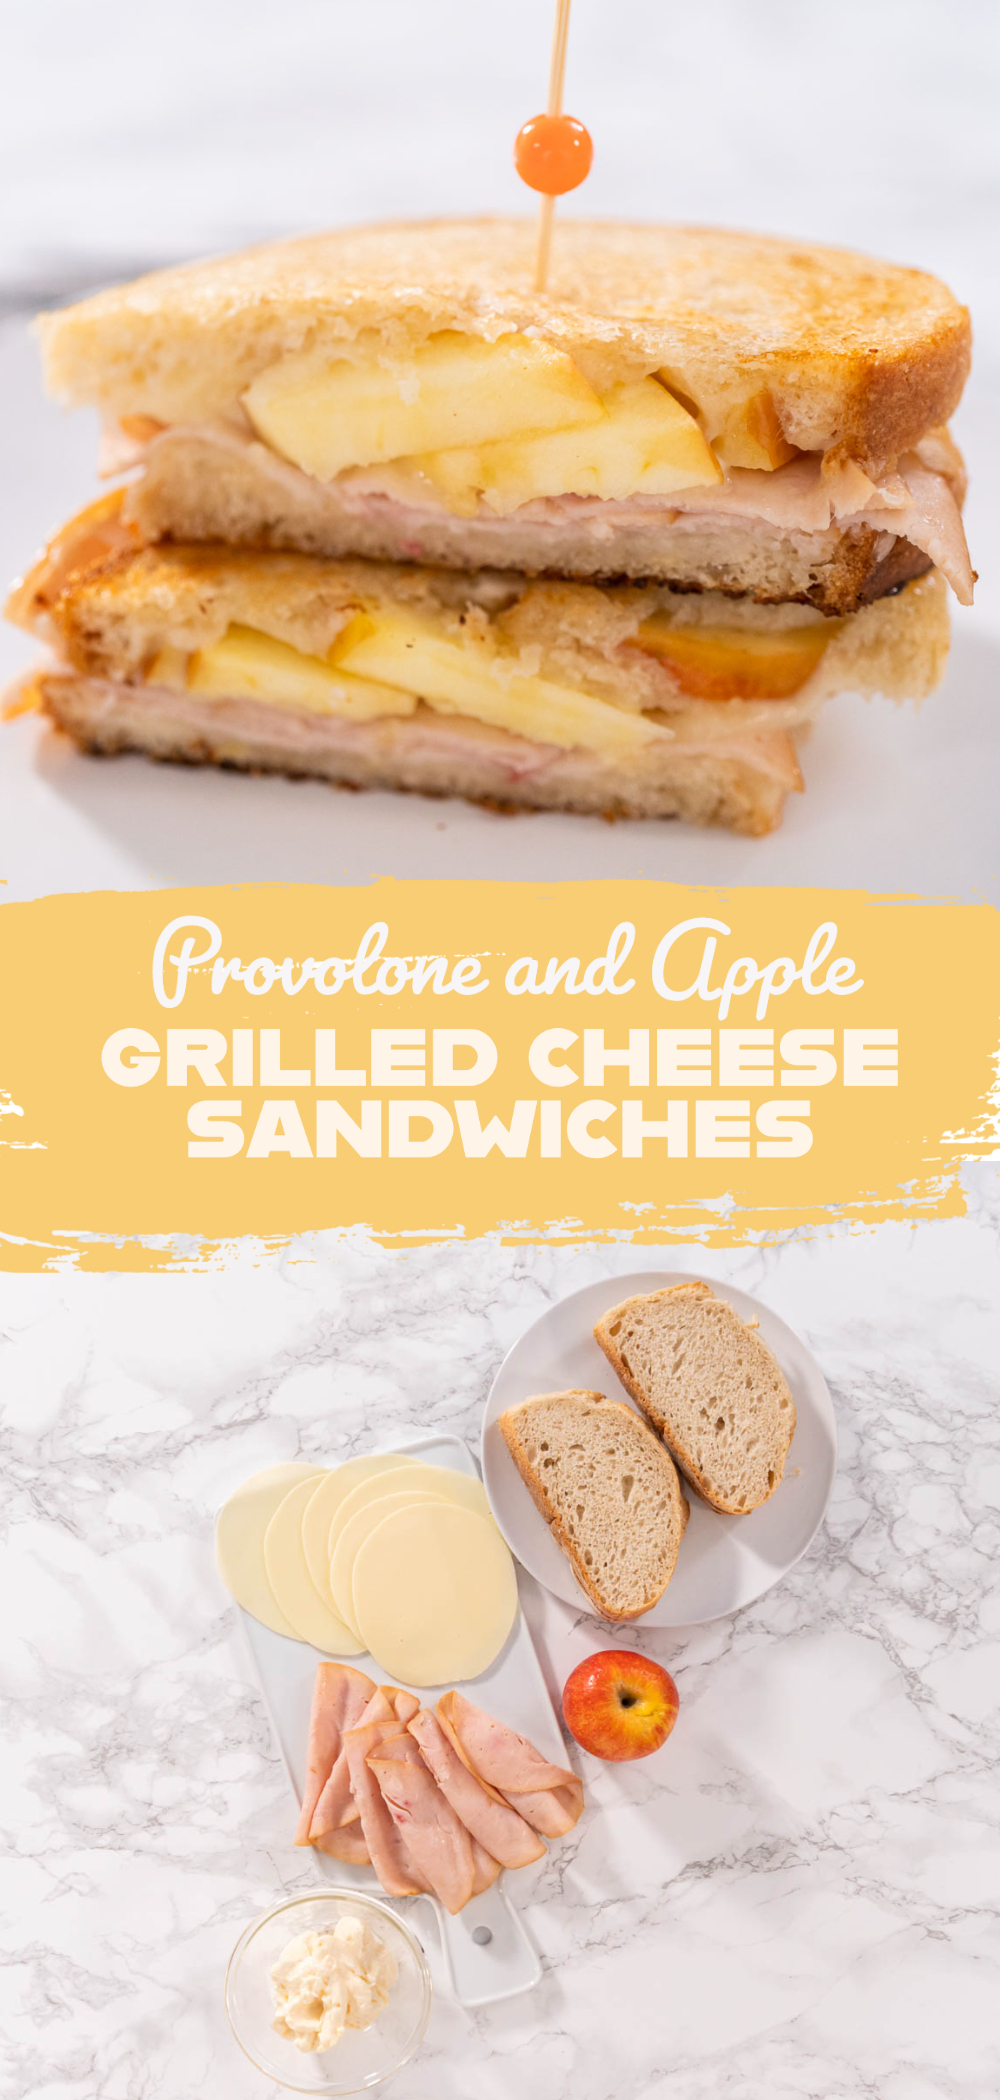 Provolone and Apple Grilled Cheese Sandwiches